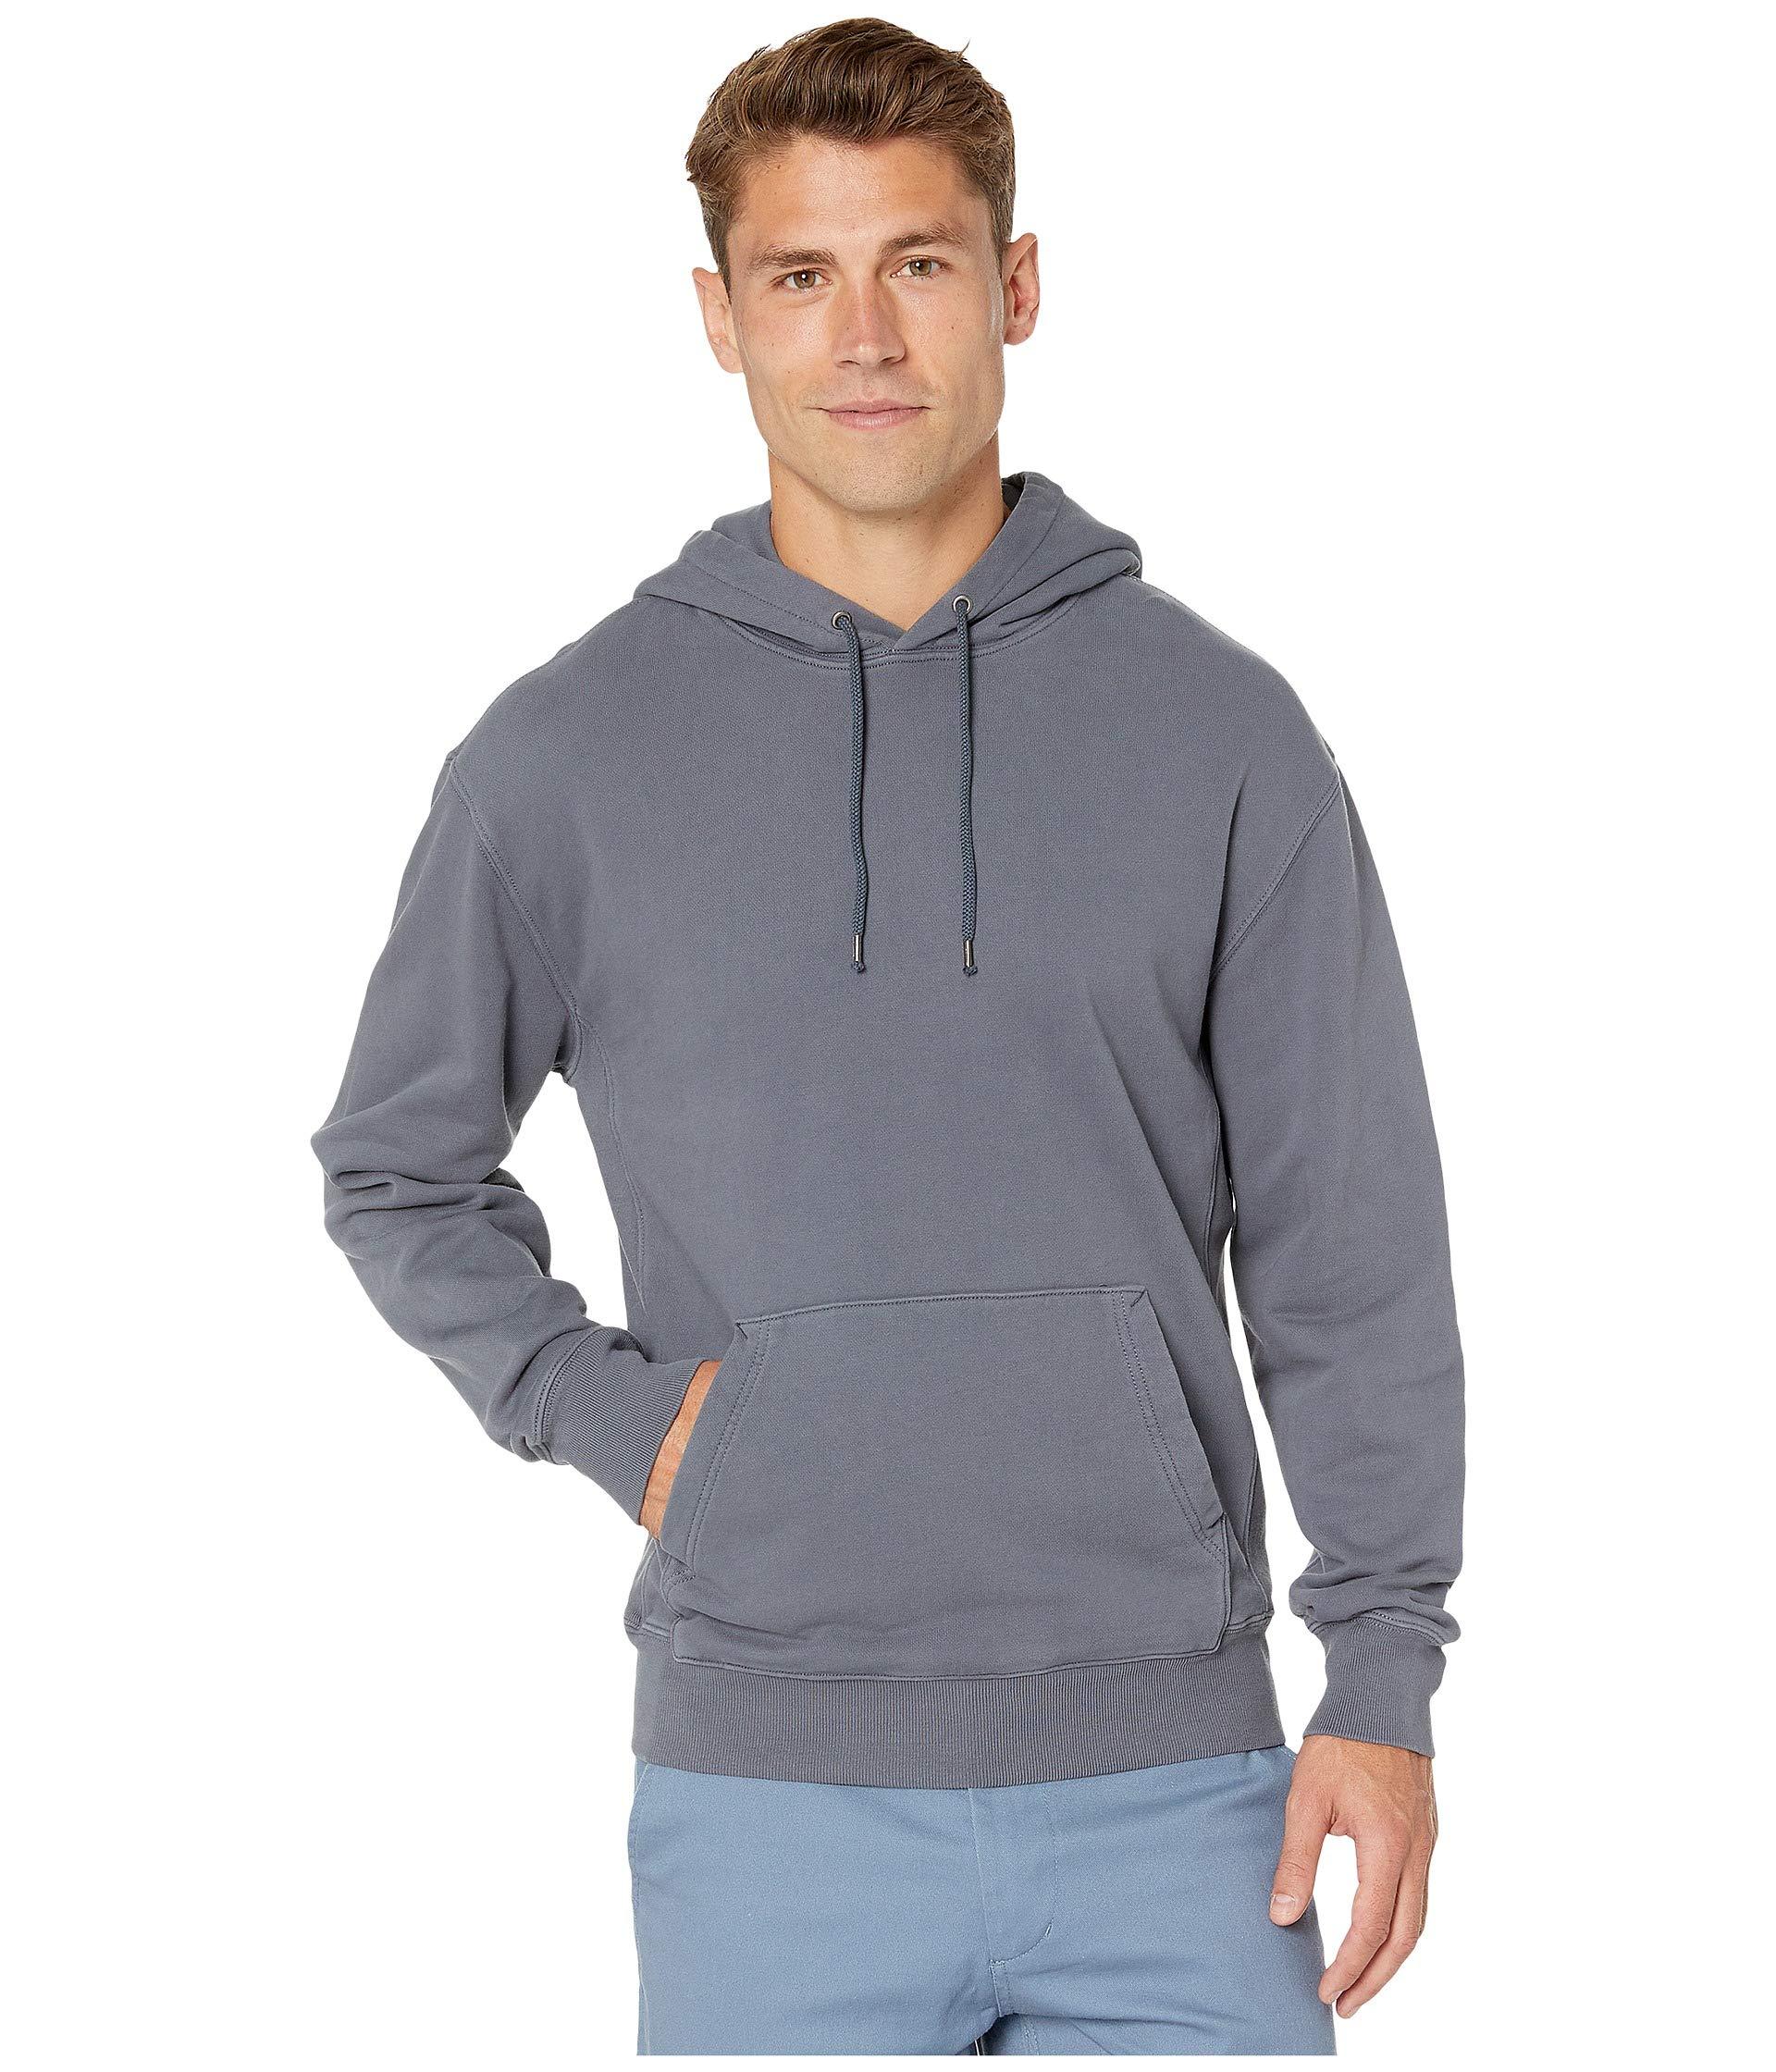 J.Crew Cotton Garment-dyed French Terry Hoodie in Black for Men - Lyst